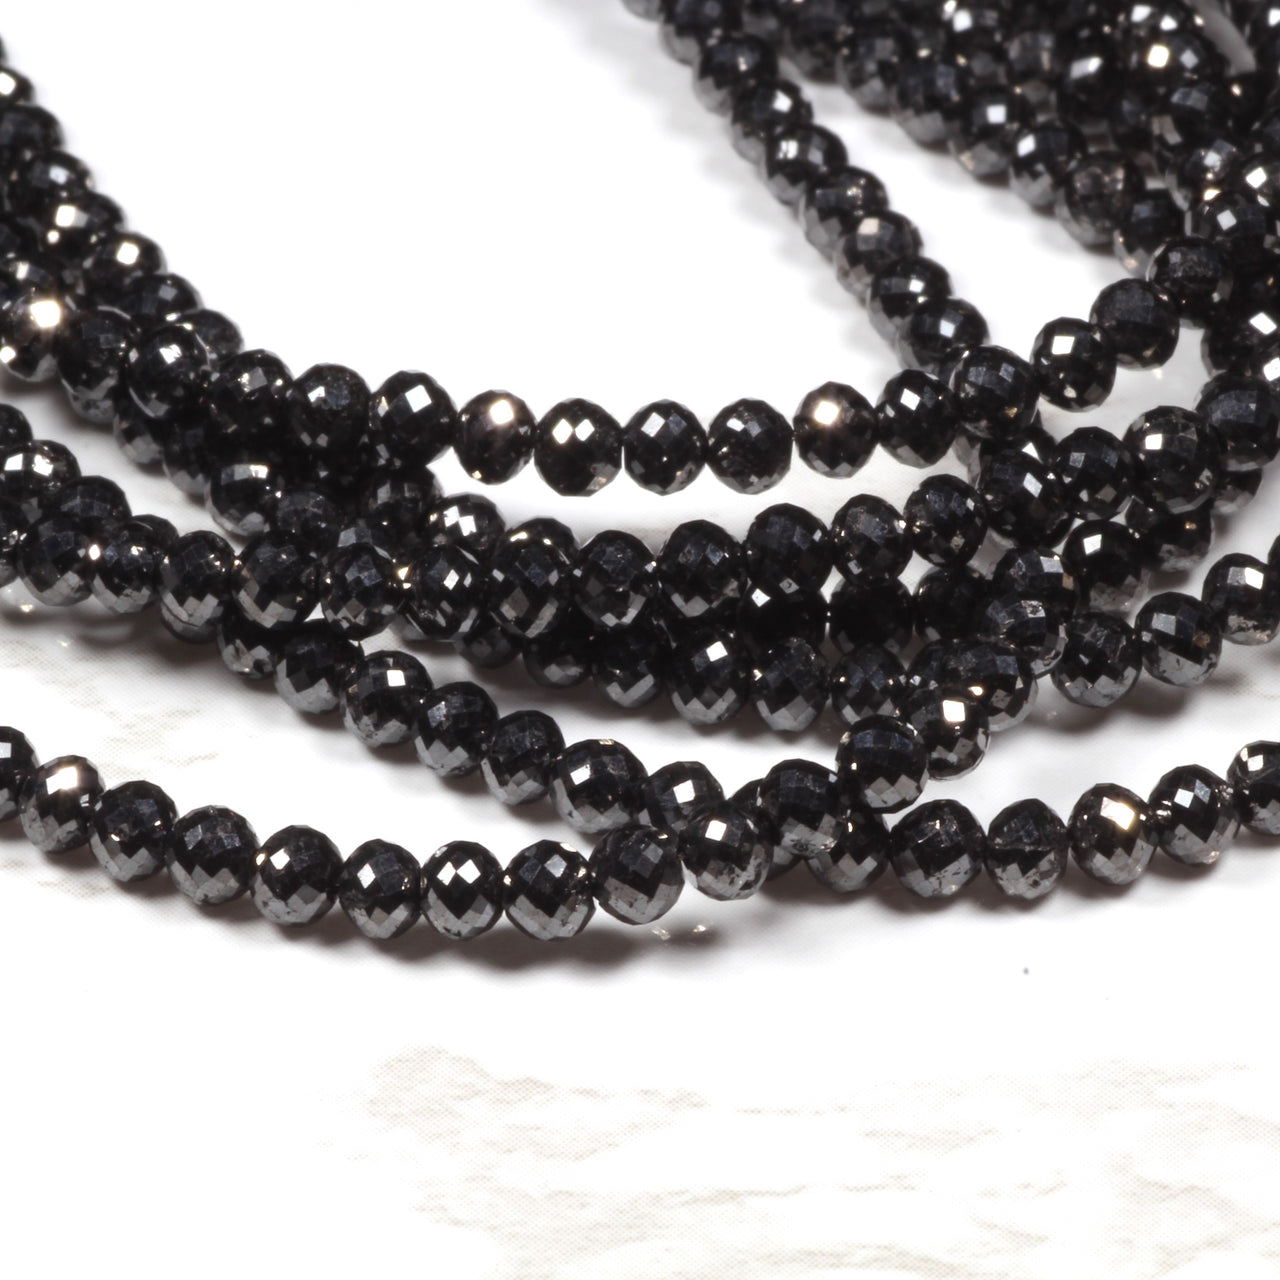 AA Black Diamond 2.5mm - 3.25mm Faceted Rondelles Bead Strand